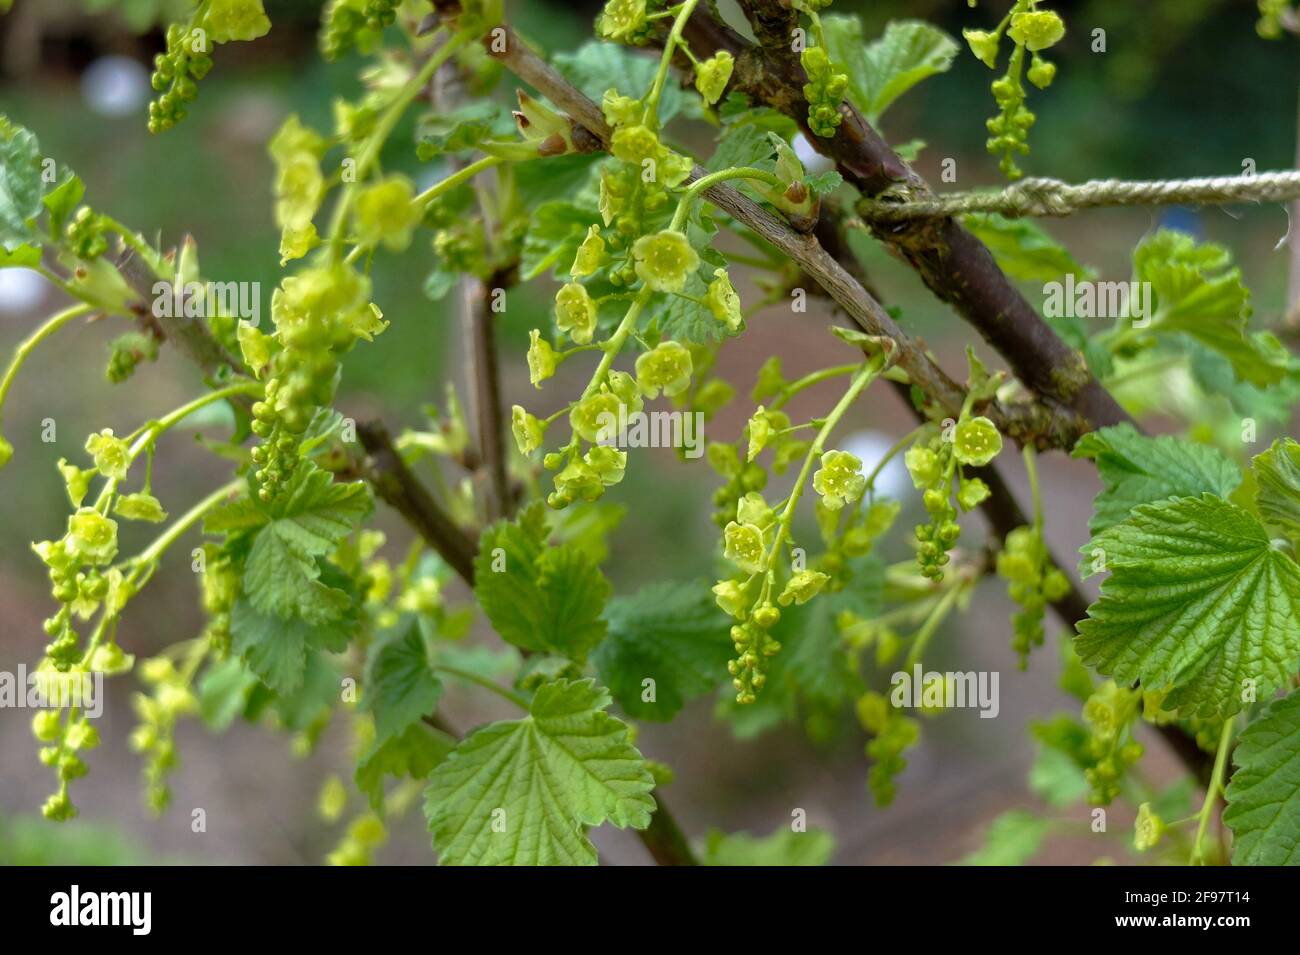 The red currant (Ribes rubrum) in flower Stock Photo